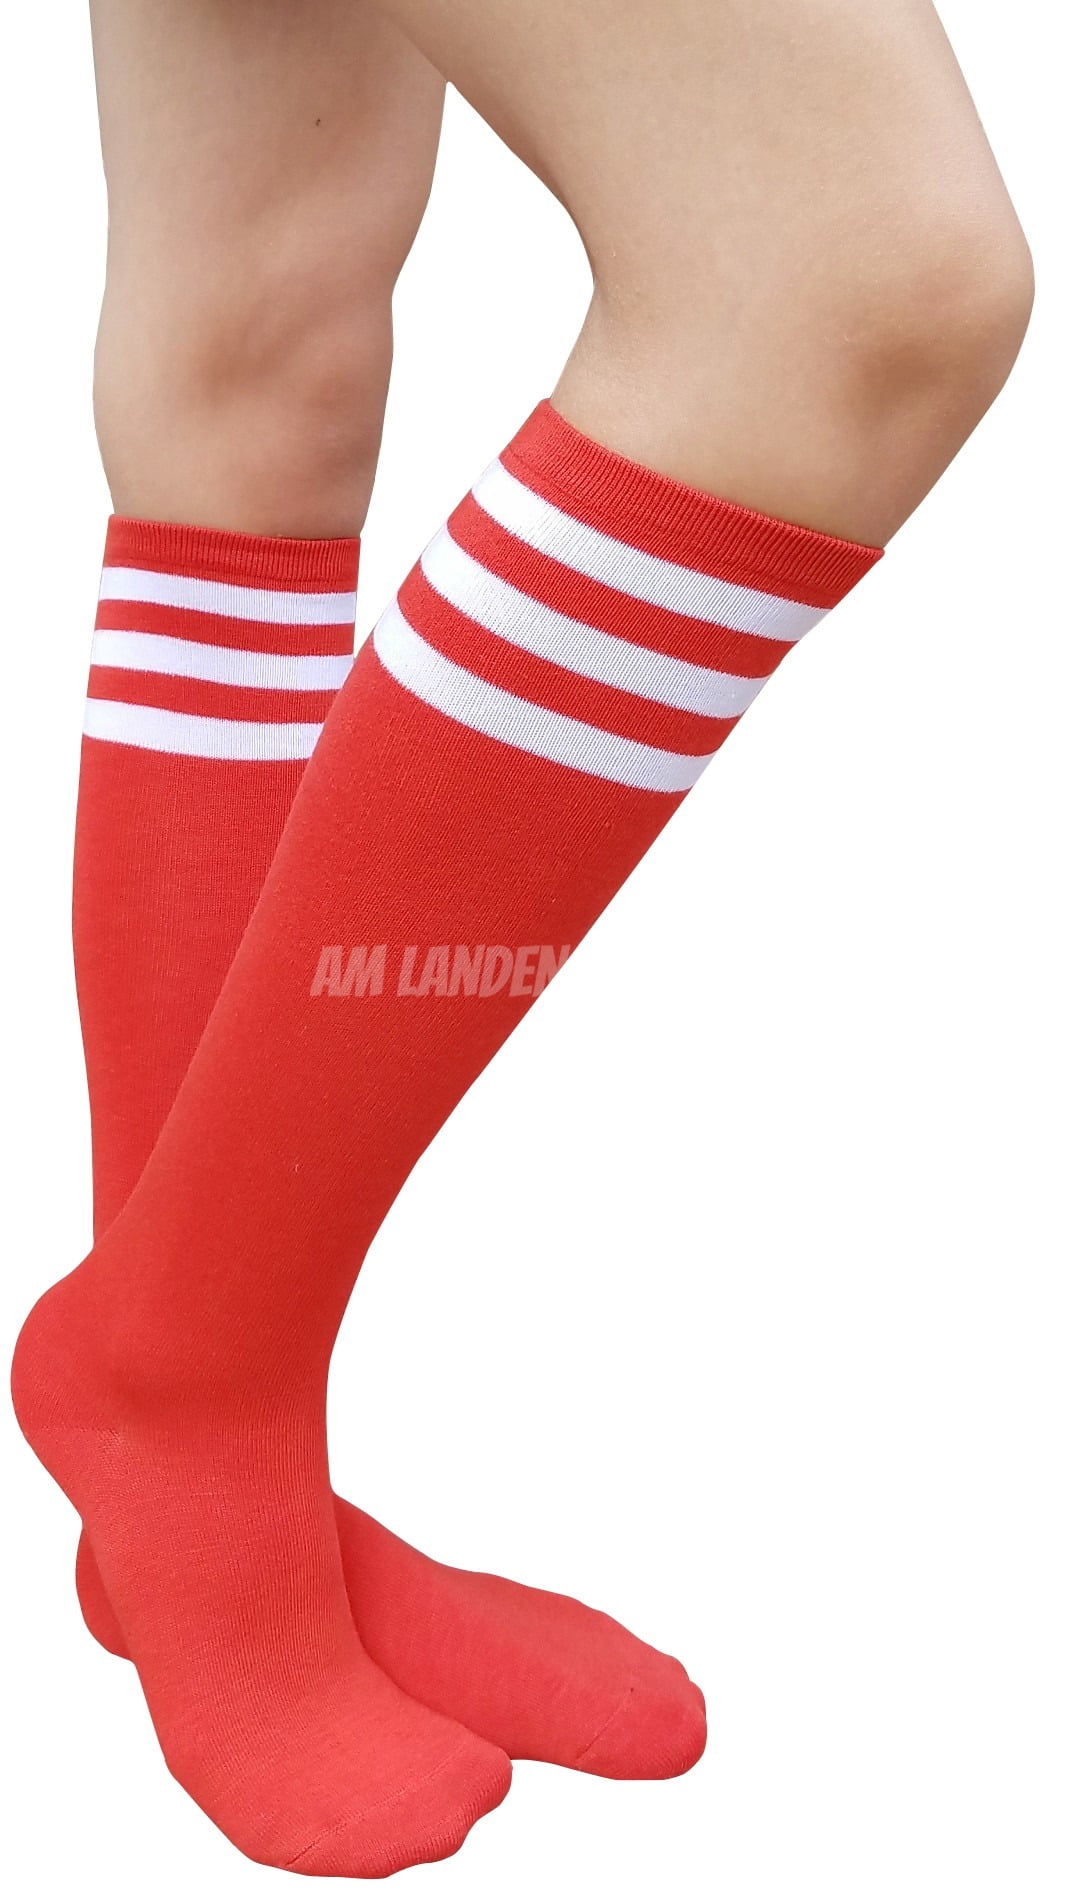 Am Landen Womens Stripe Knee High Socks, Red And White Striped Rugby Socks